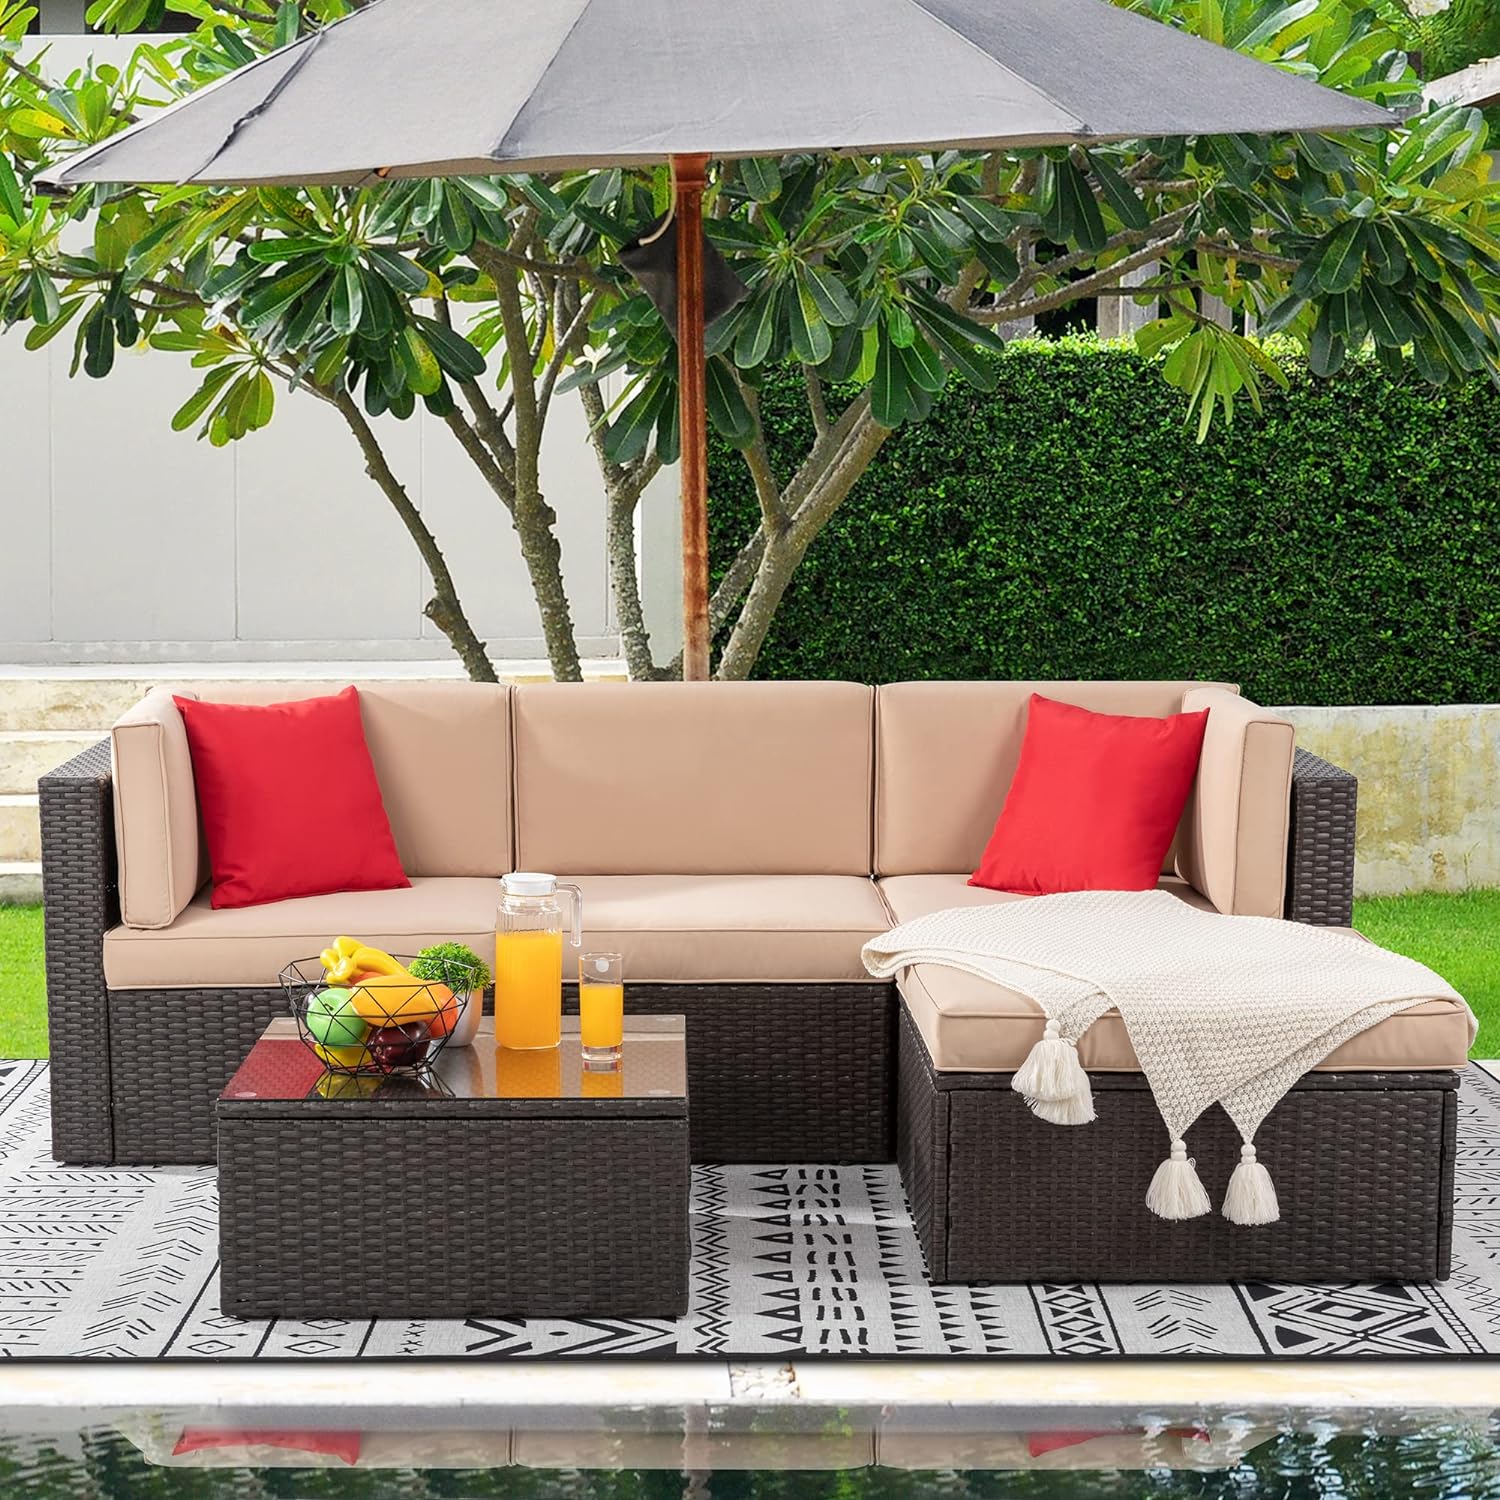 Walsunny 5 Pieces Patio Furniture Sets Outdoor All-Weather Sectional Patio Sofa Set PE Rattan Wicker Conversation Set Beige - image 1 of 7